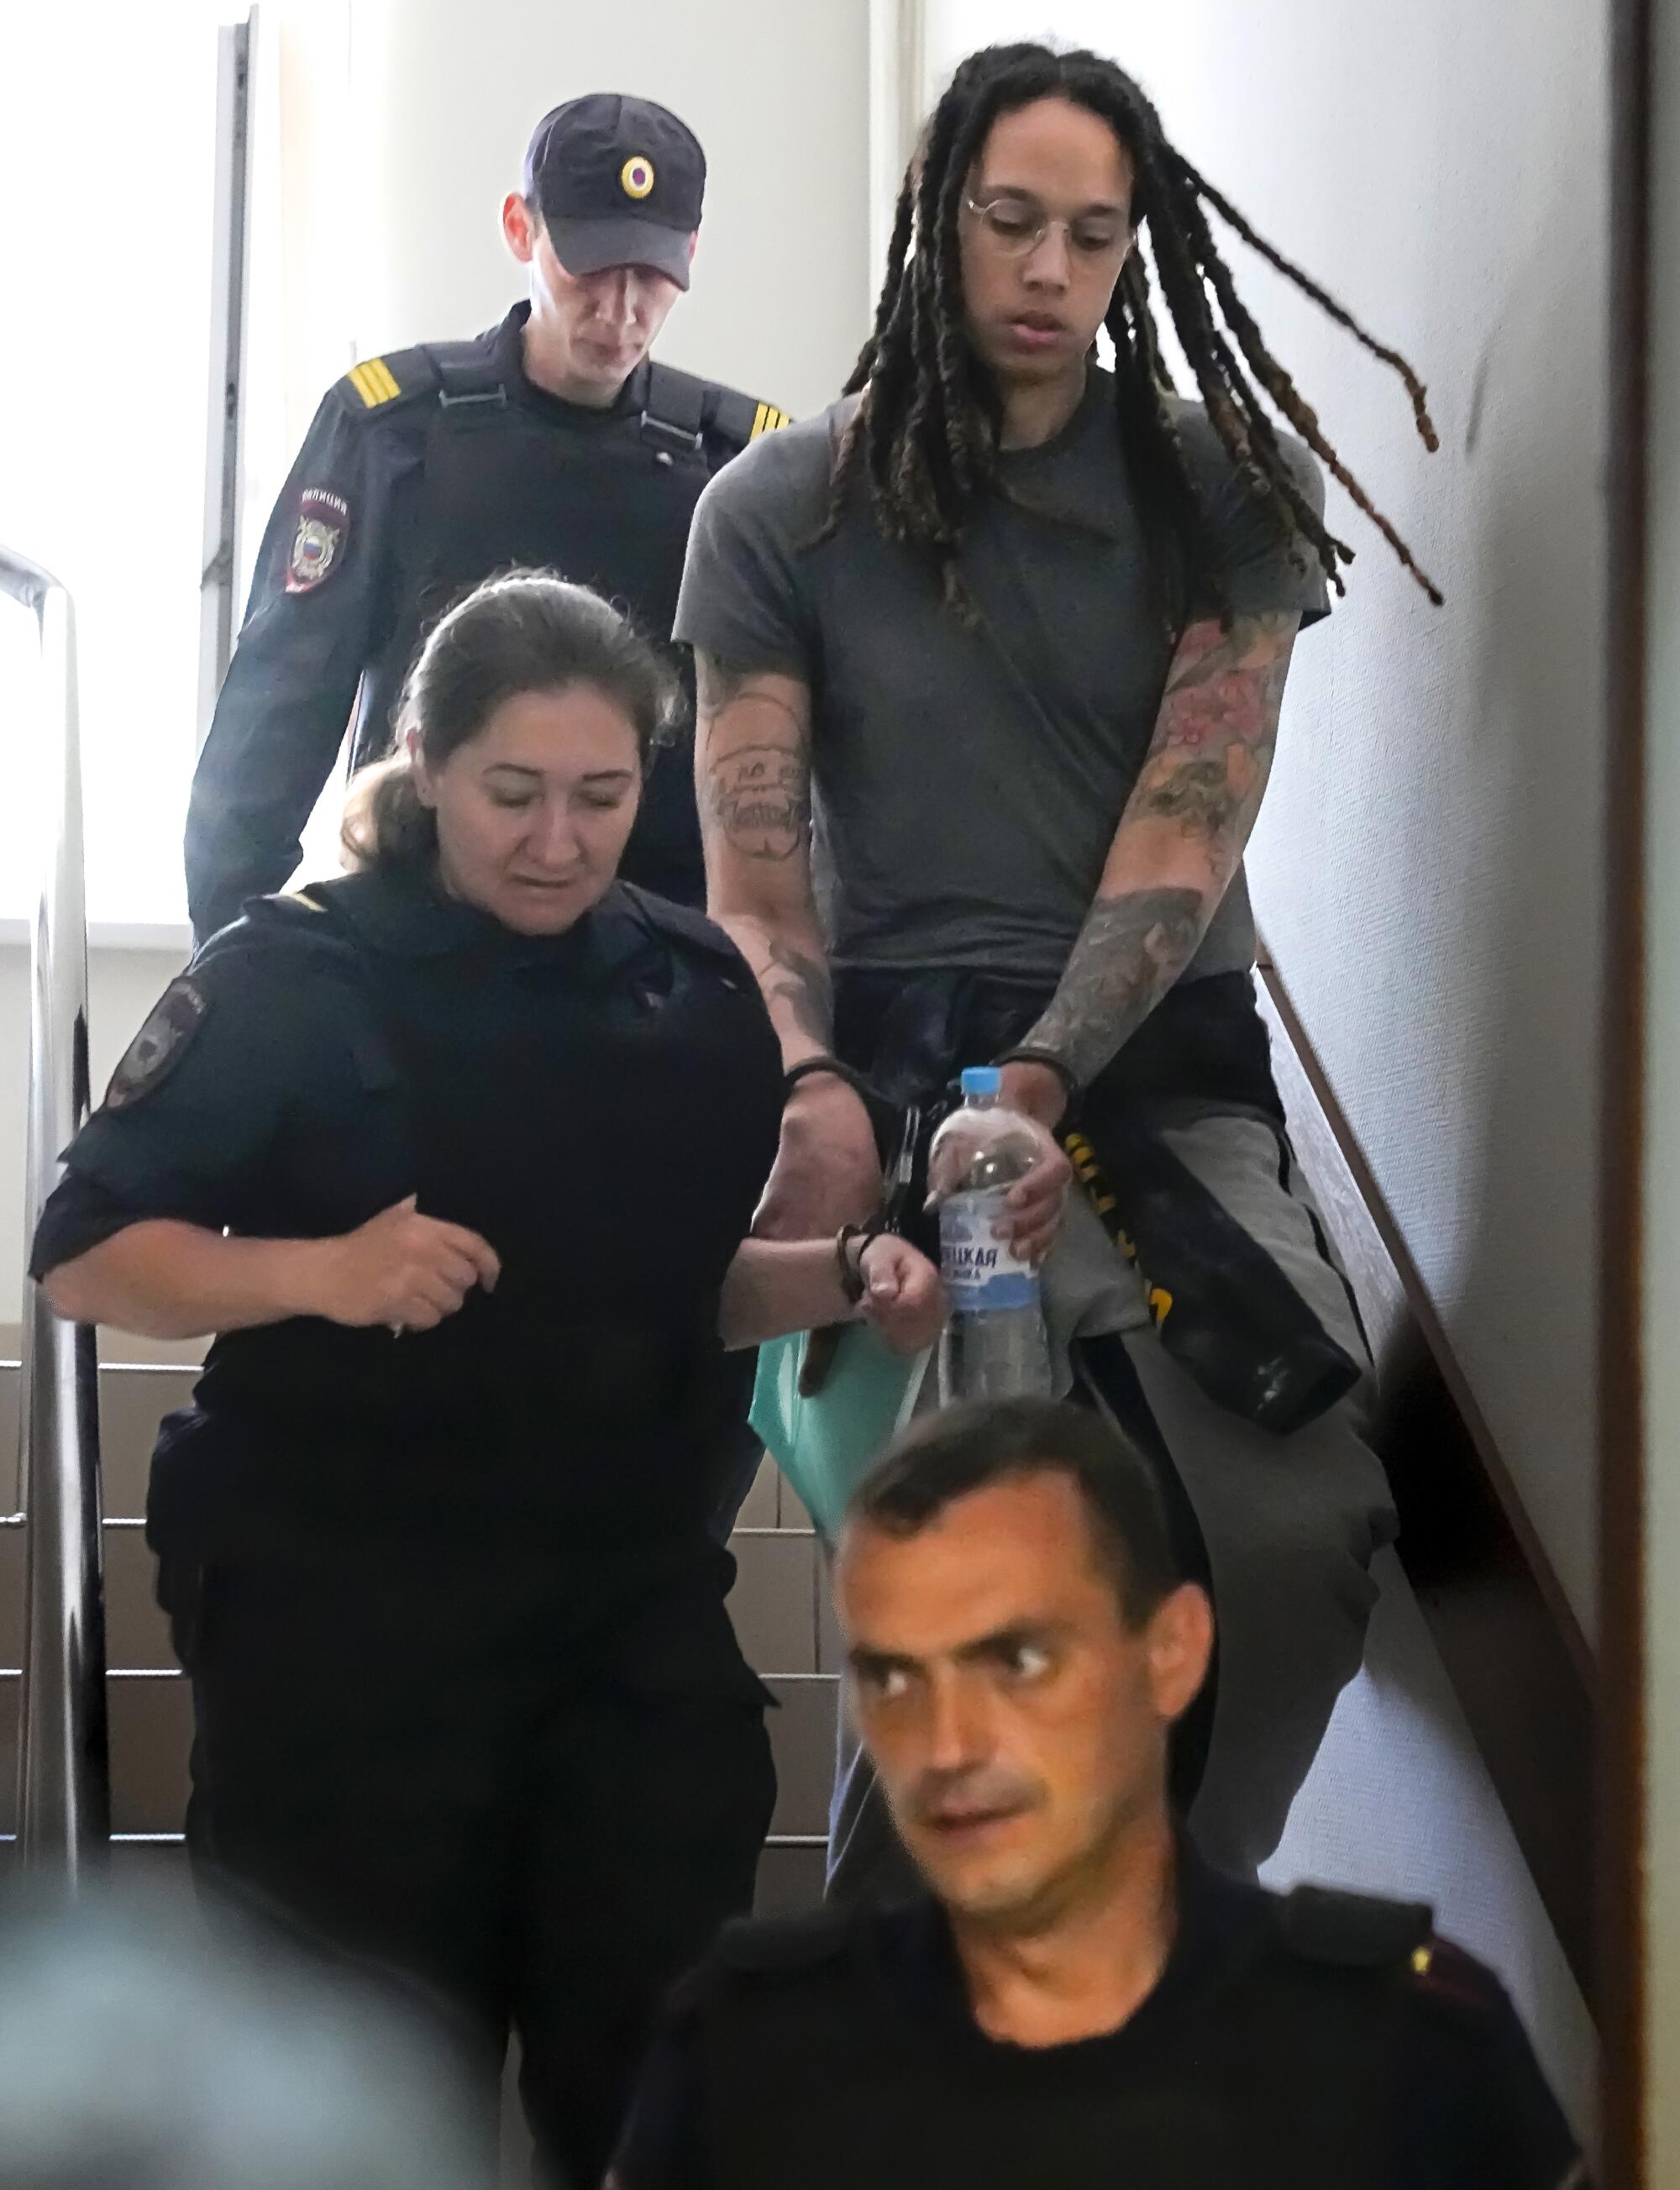 Brittney Griner in a stairwell, escorted by uniformed people.